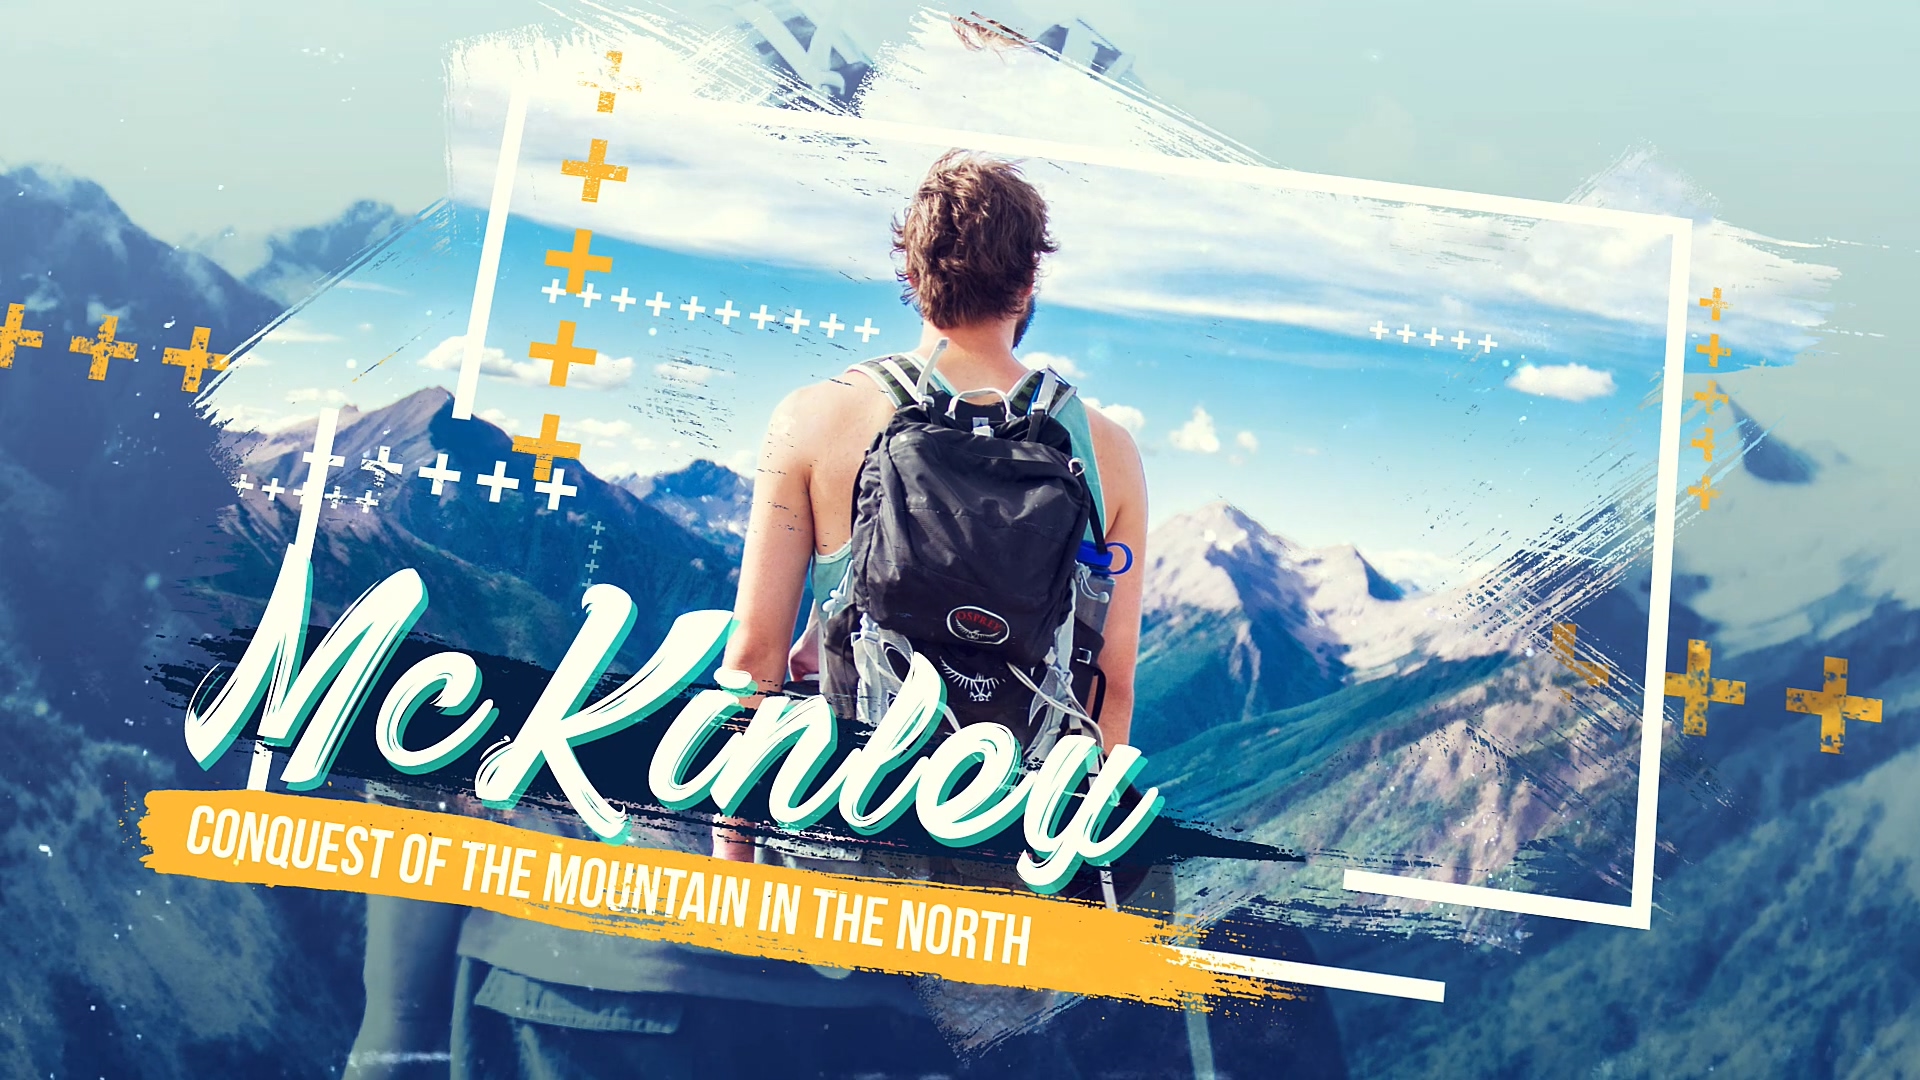 Spirit Of Travel Slideshow 20322610 - Free After Effects Templates